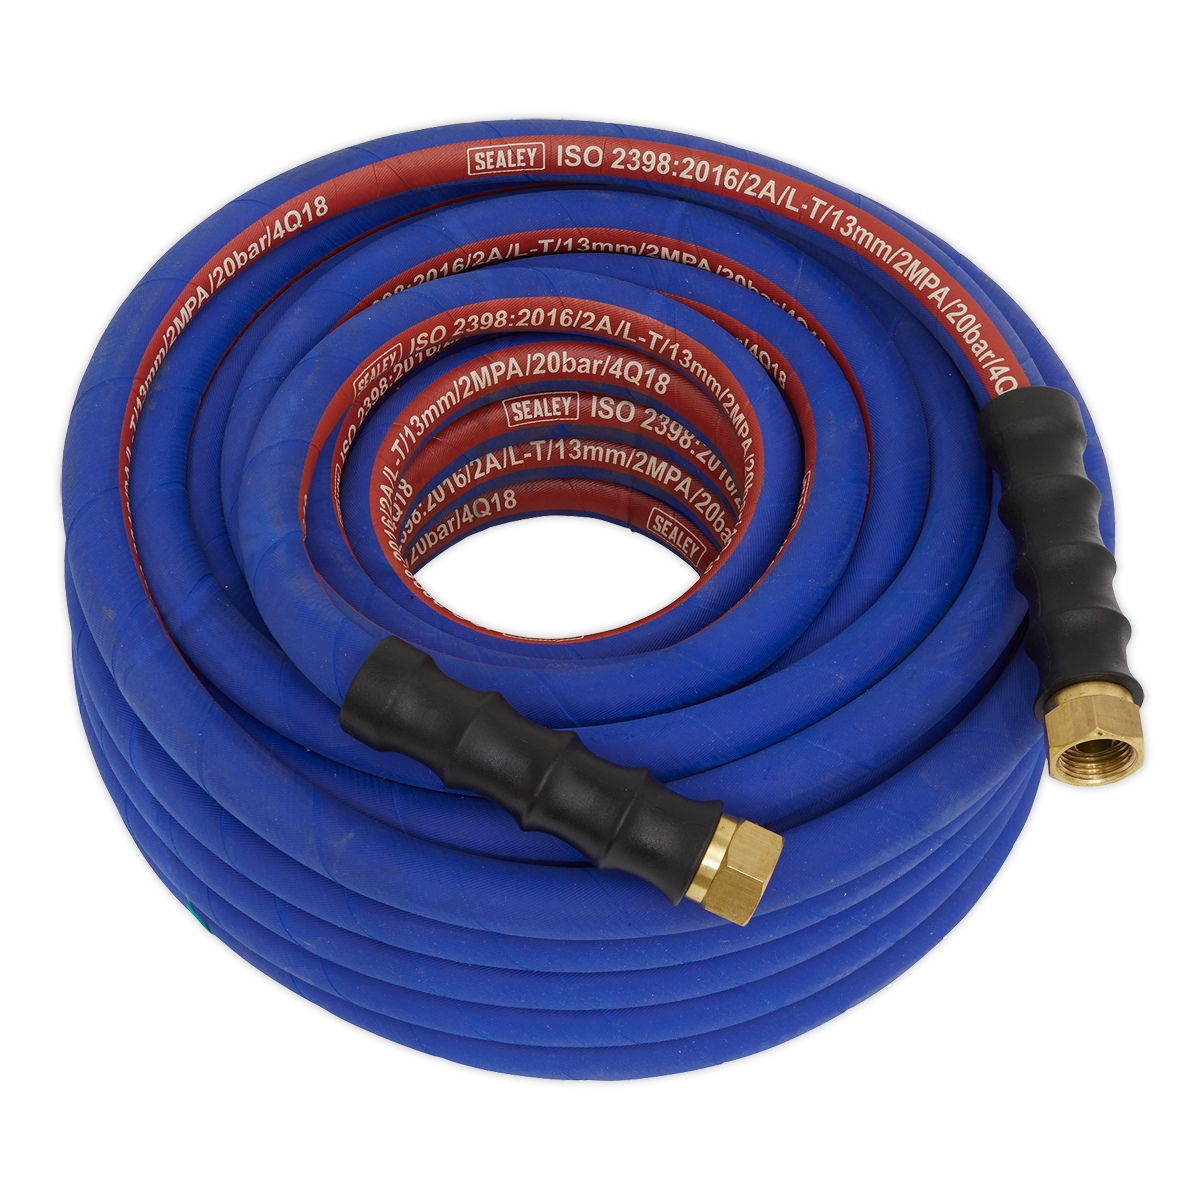 Sealey Air Hose 20m x Ø13mm with 1/2"BSP Unions Extra-Heavy-Duty